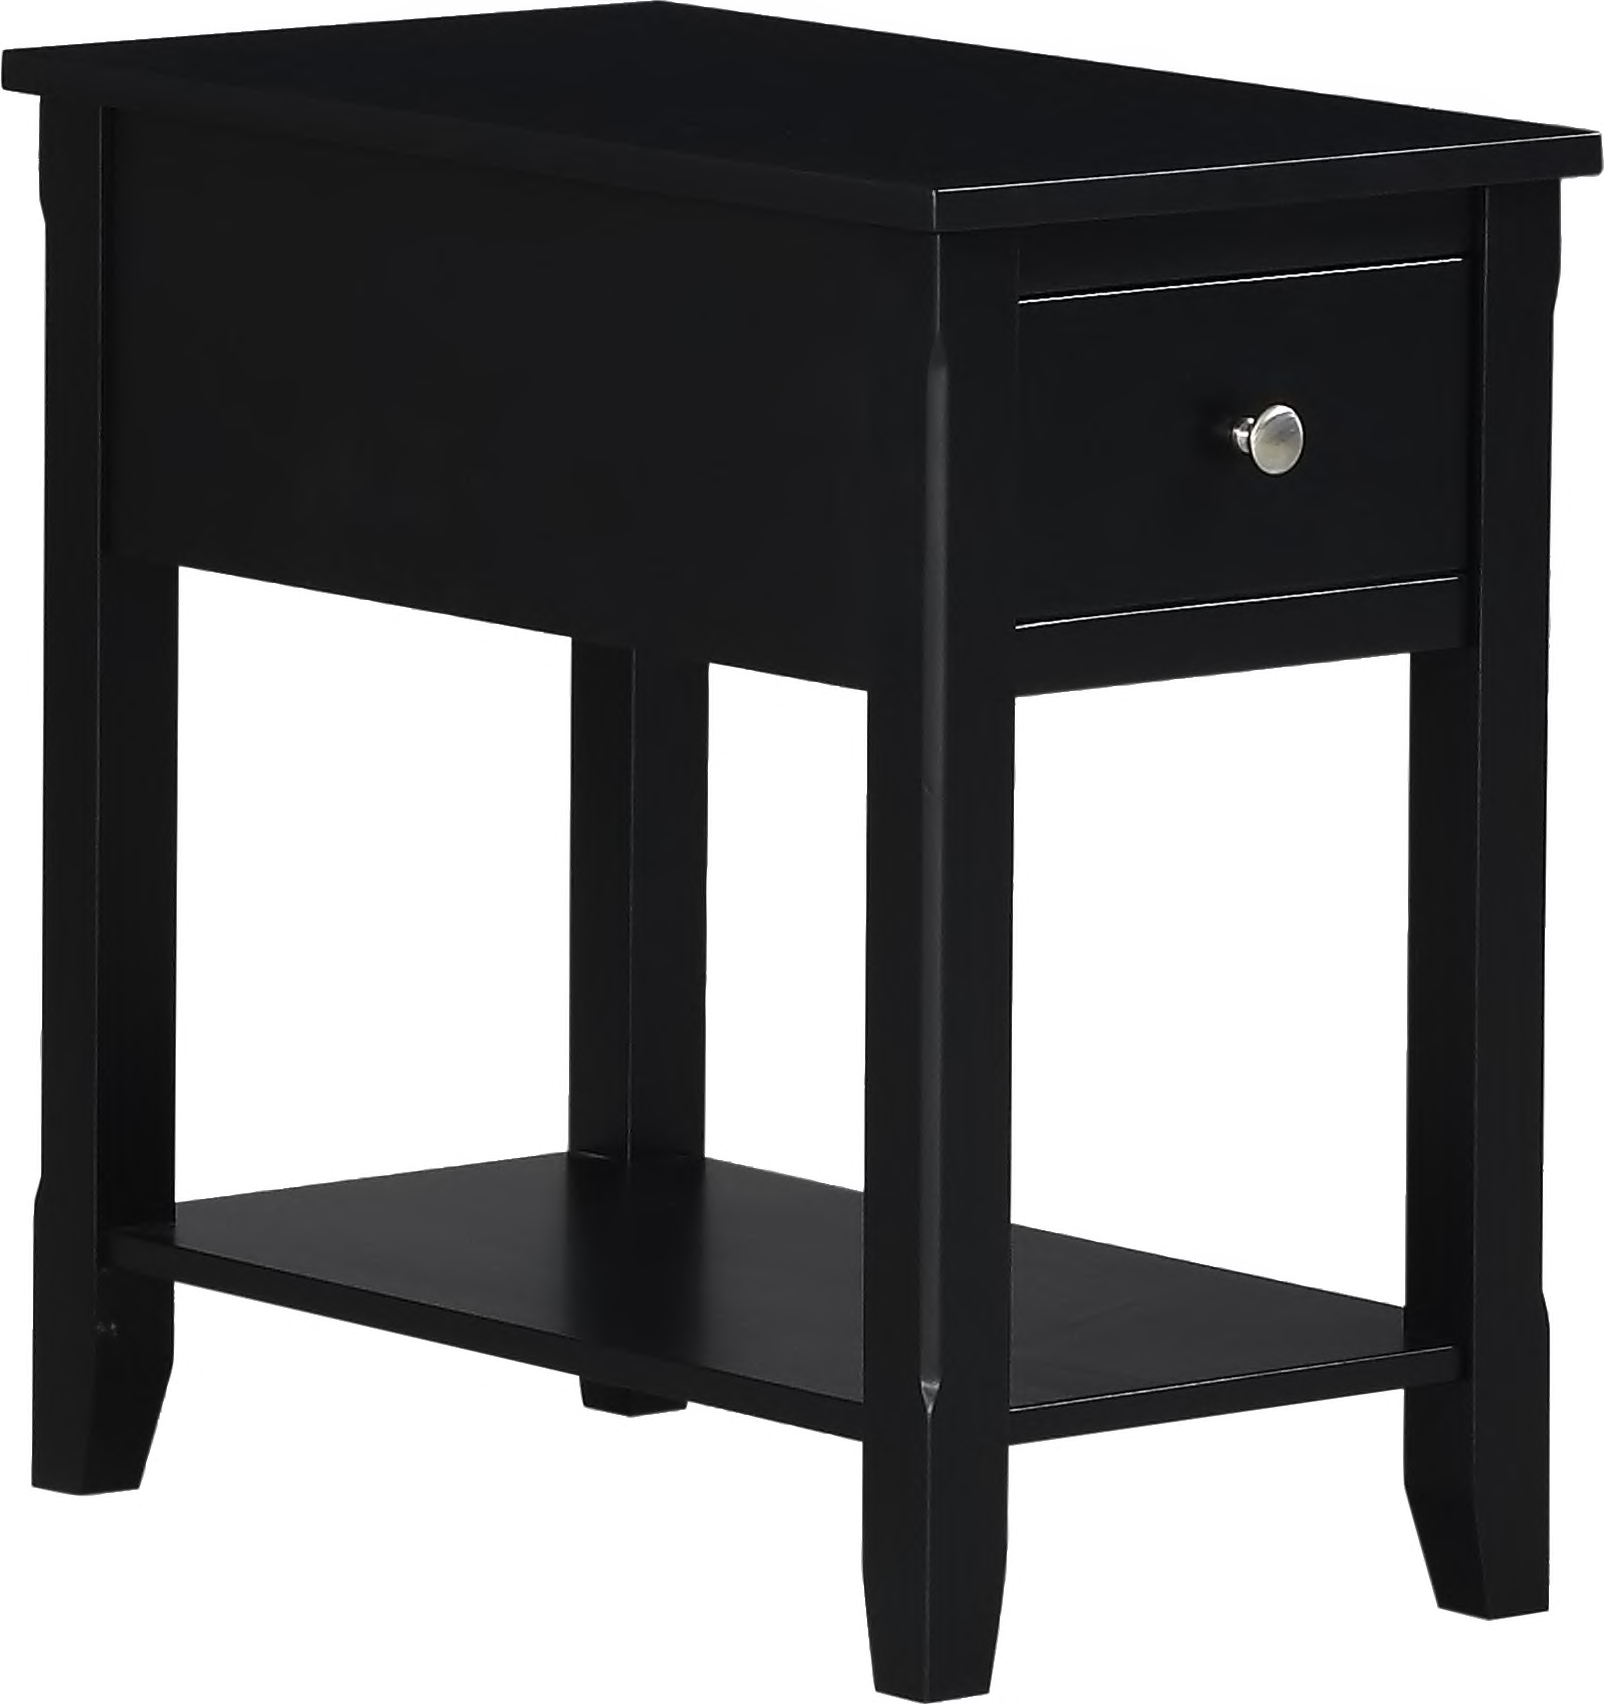 ardale black accent table tables colors tall with drawer blue patio side french chairs target dressers white ginger jar lamp base round mattress room essentials curtains modern